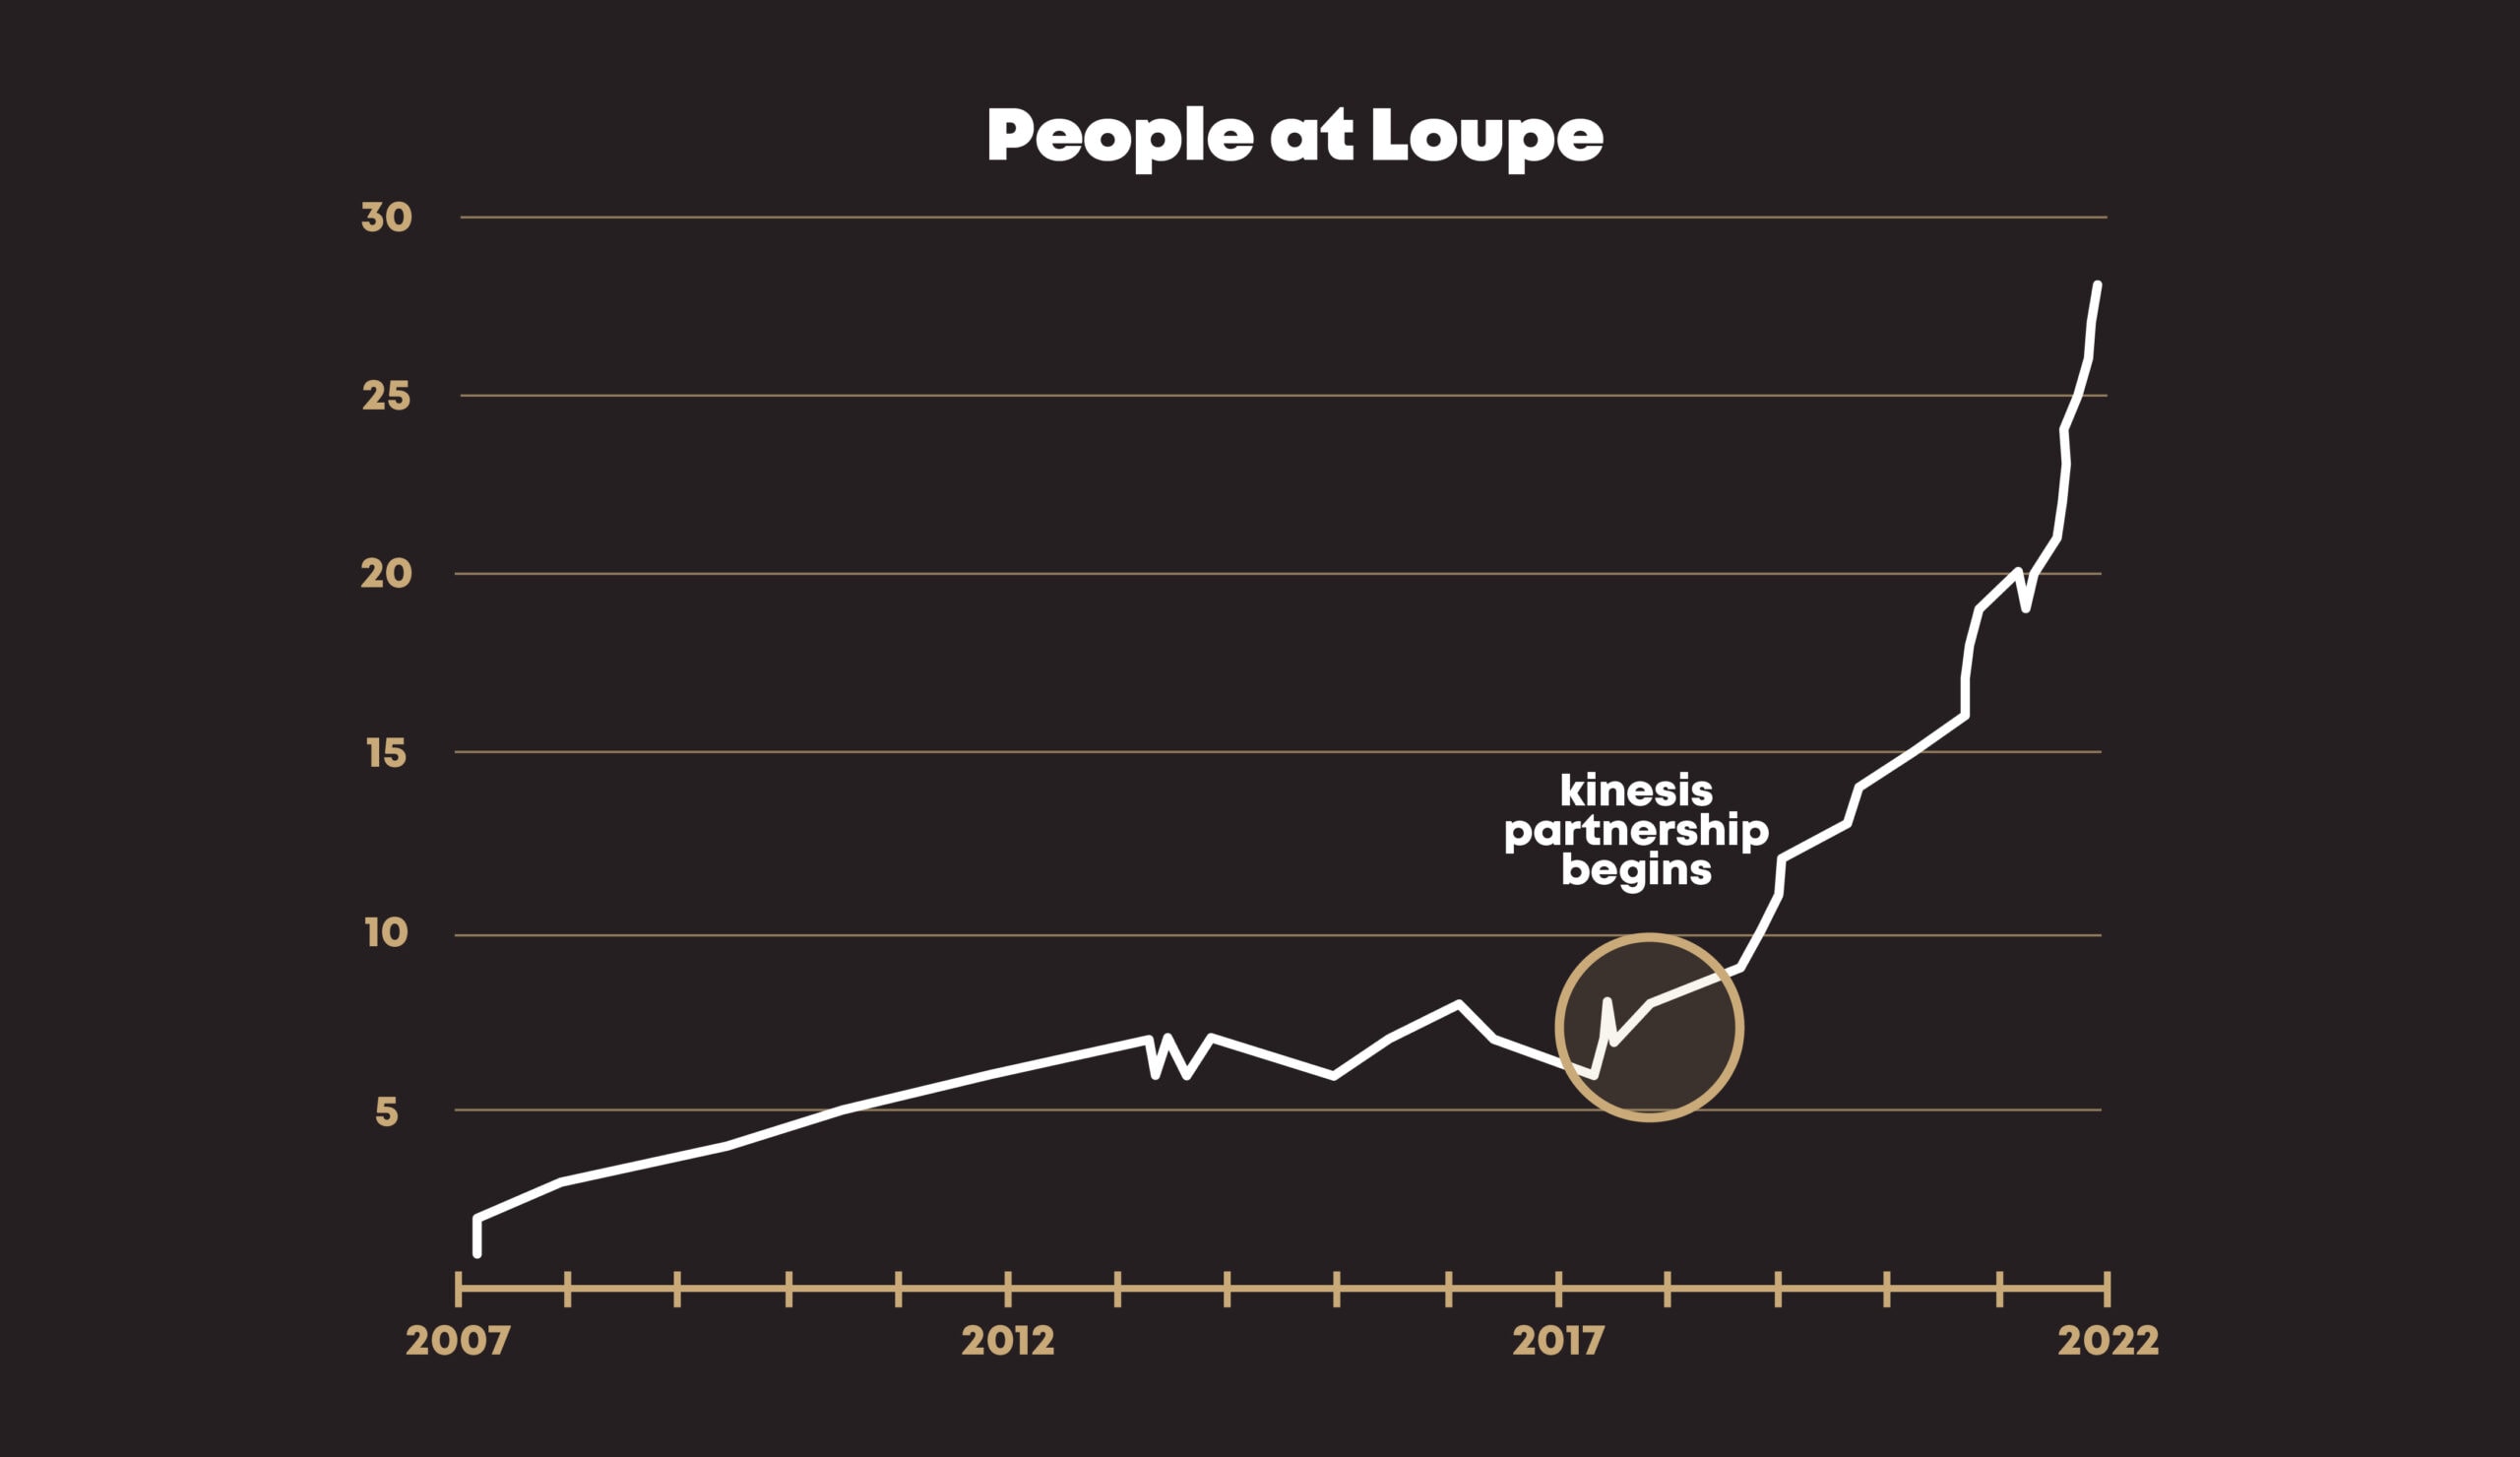 Chart with title: "People at Loupe" showing sharp increase after Kinesis started working with Loupe